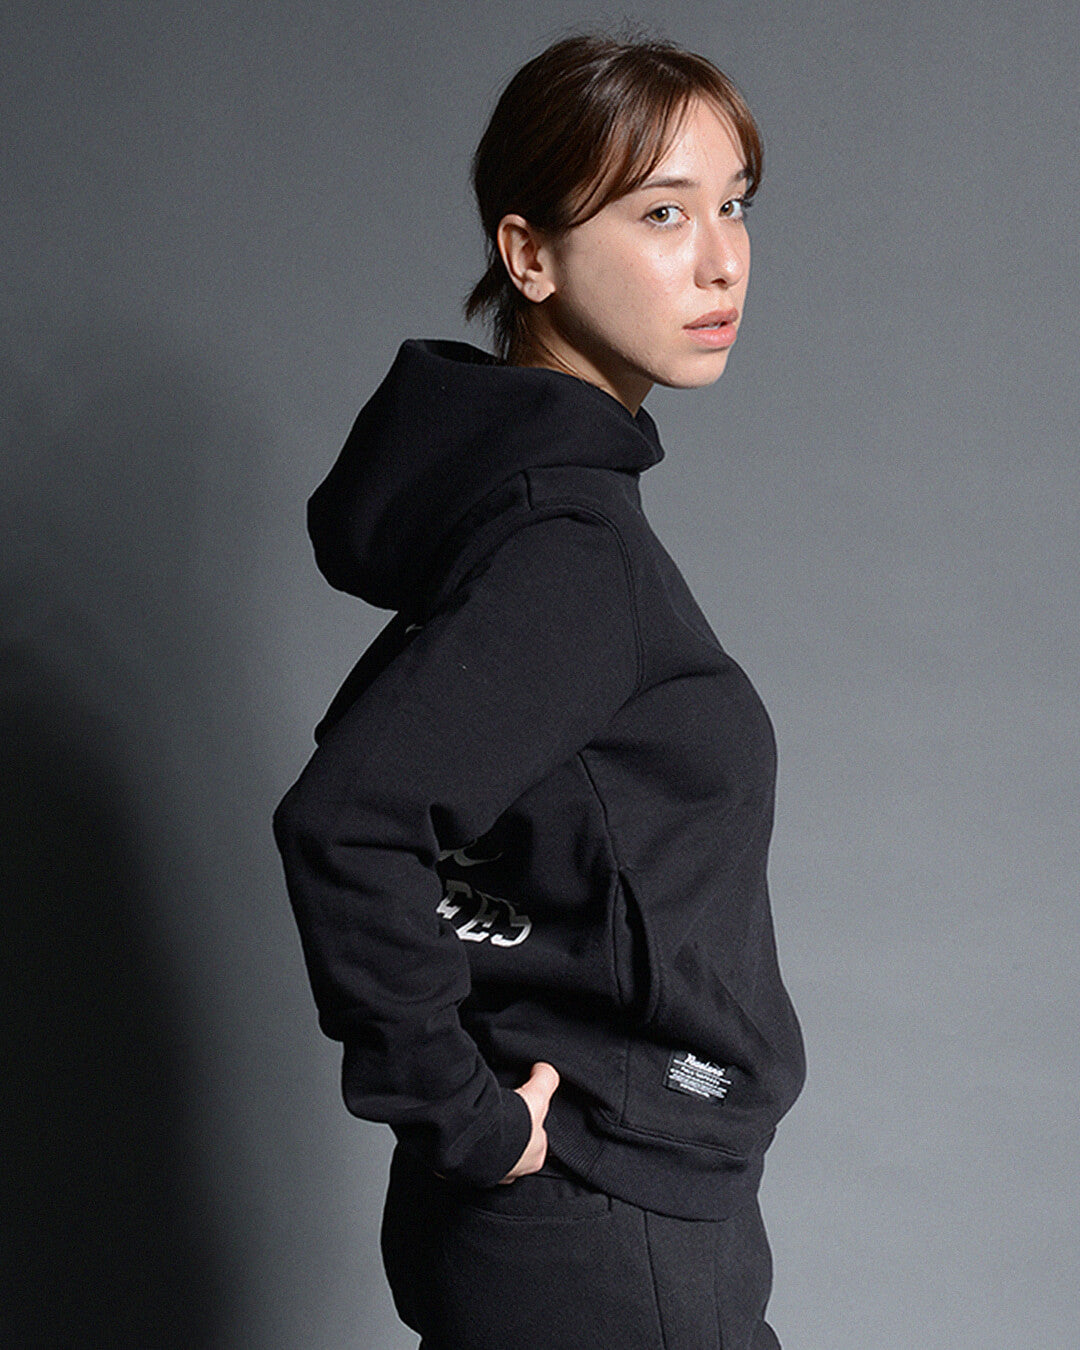 SLOWUP LOGO HEAVY HOODIE(SOLID)